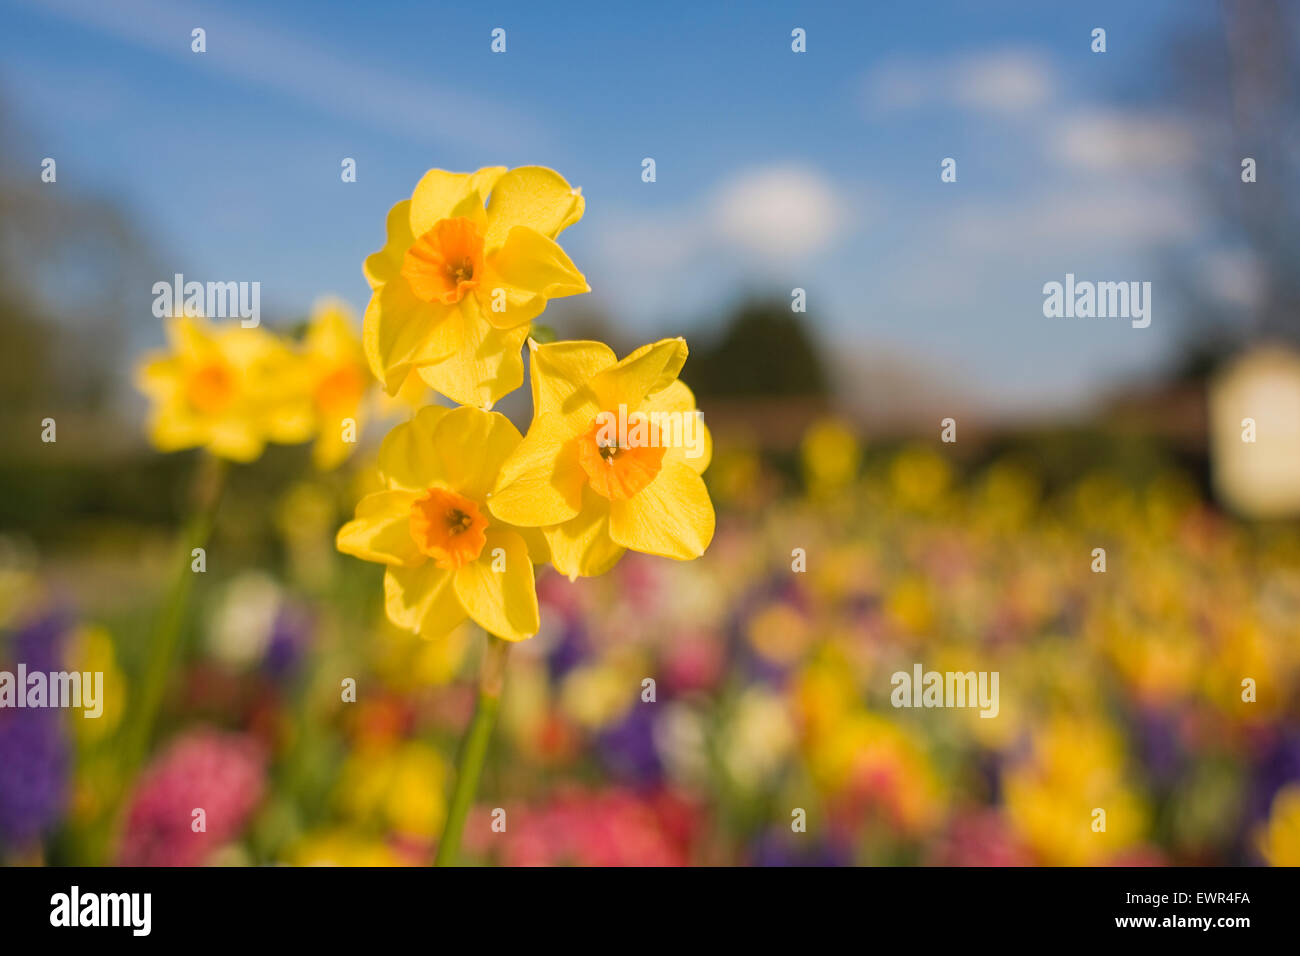 Close up of daffodils lit by soft springtime sunshine, background out of focus. Photo taken in the garden of Shrewsbury Castle, Shropshire. 2015. Stock Photo